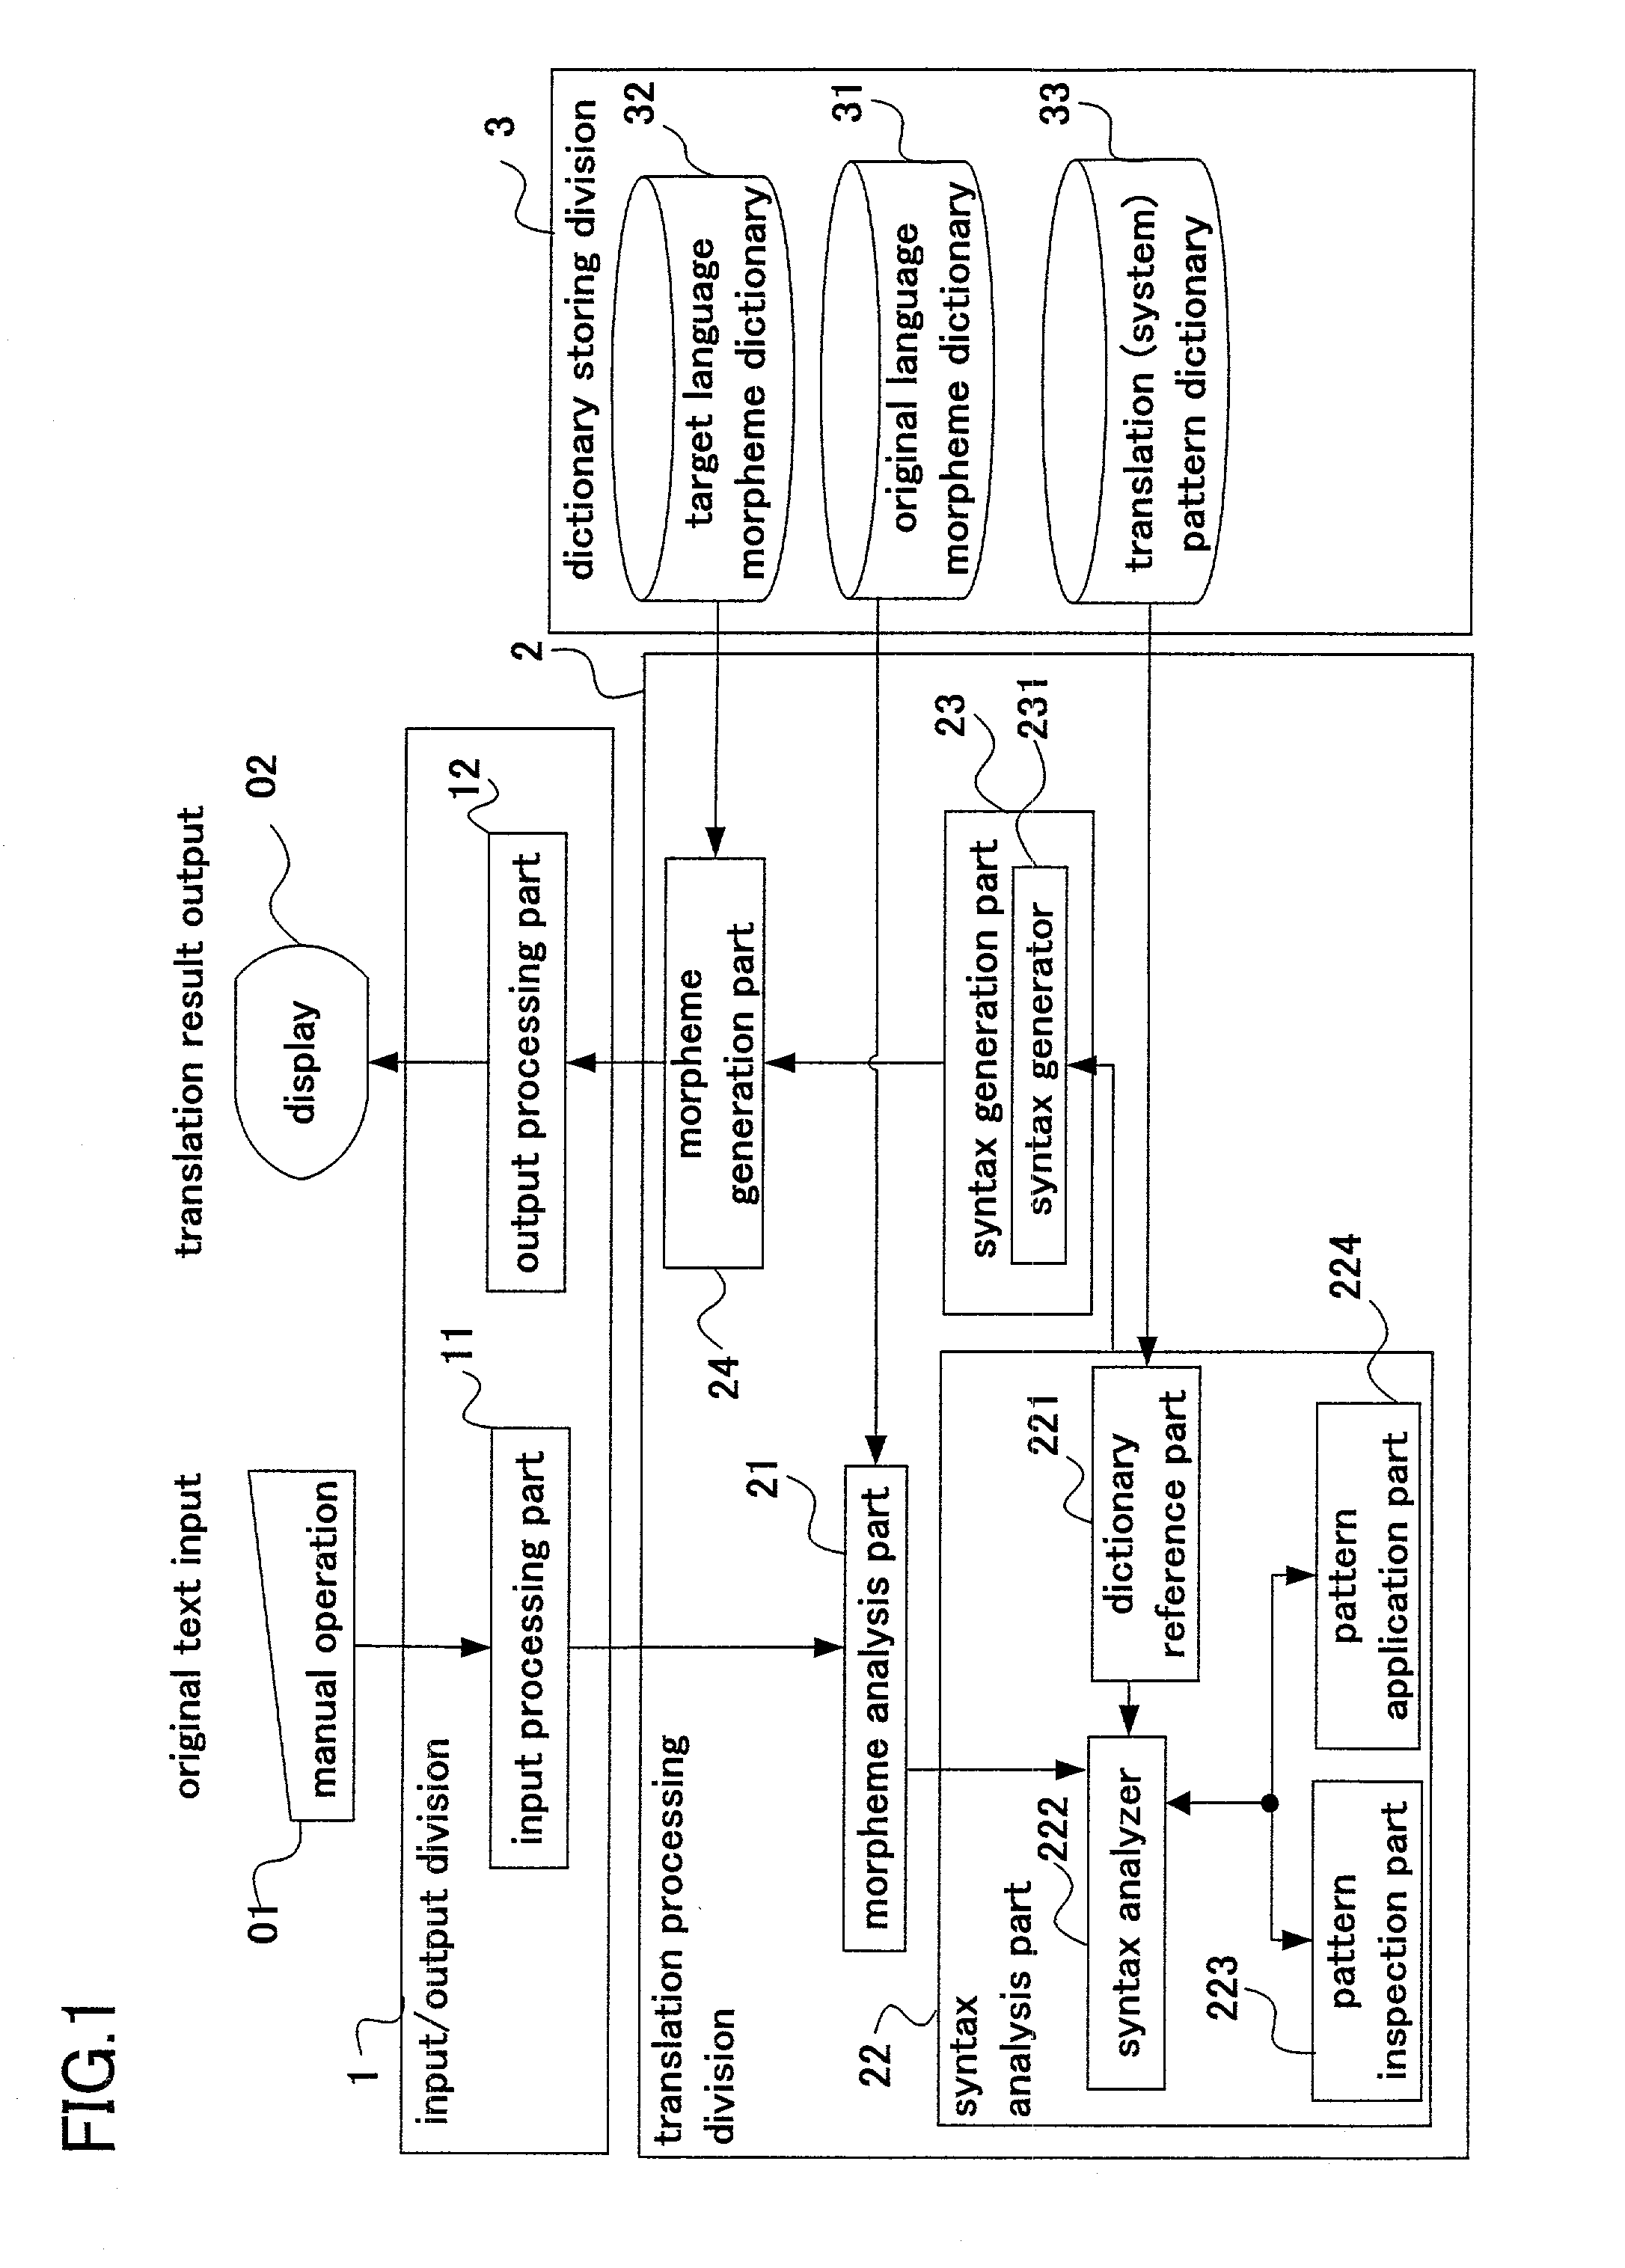 Apparatus and method for natural language processing